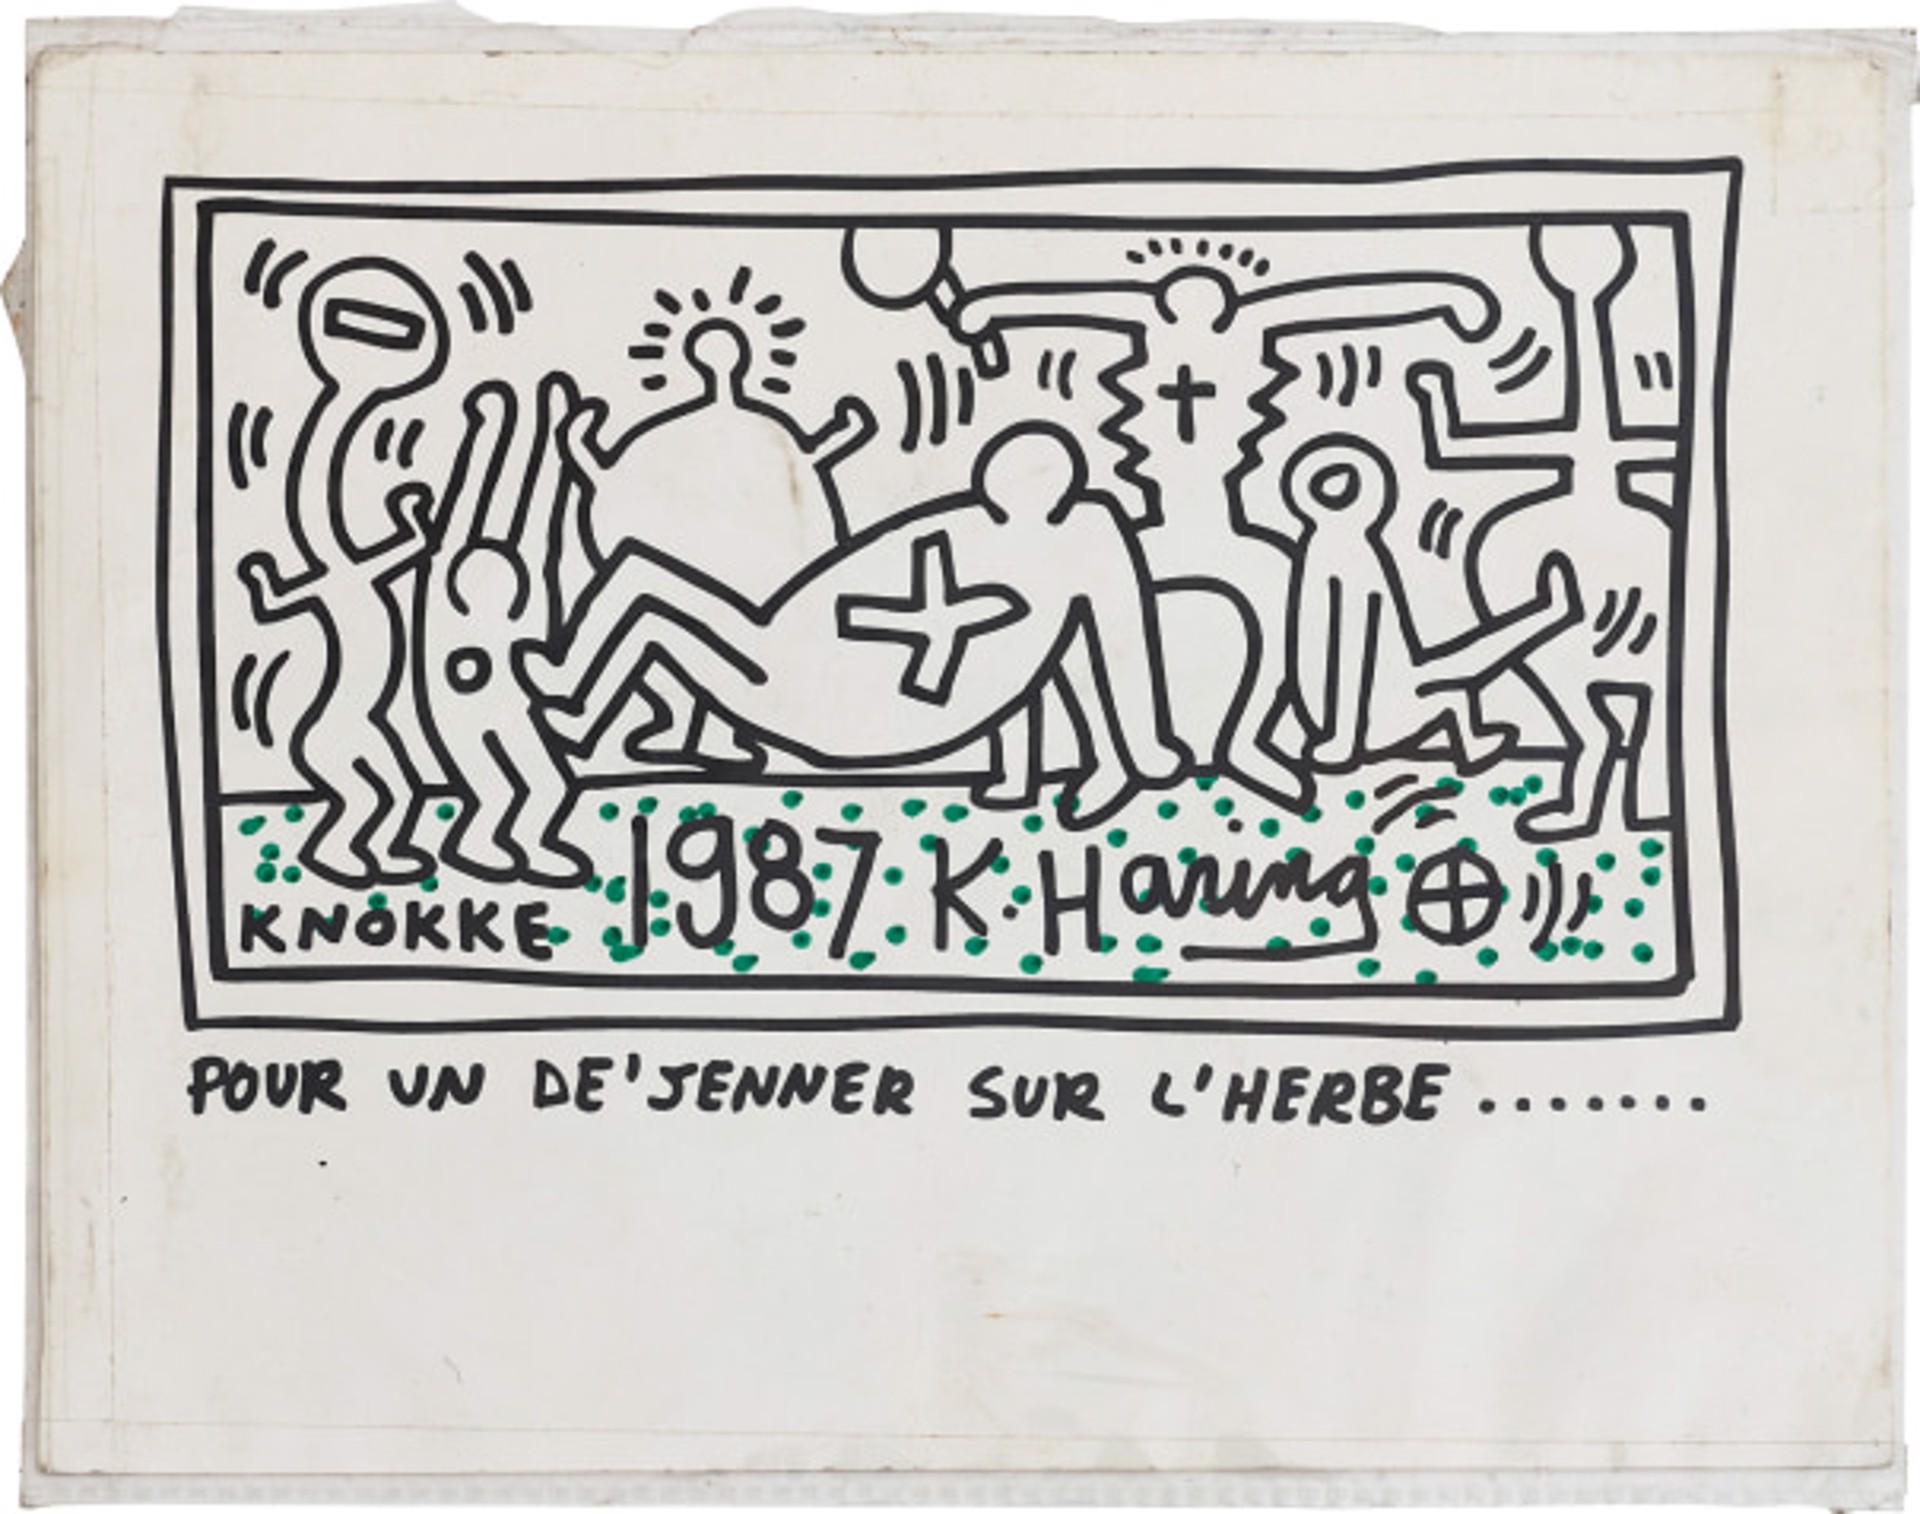 Untitled (Helmet and Invitation) by Keith Haring